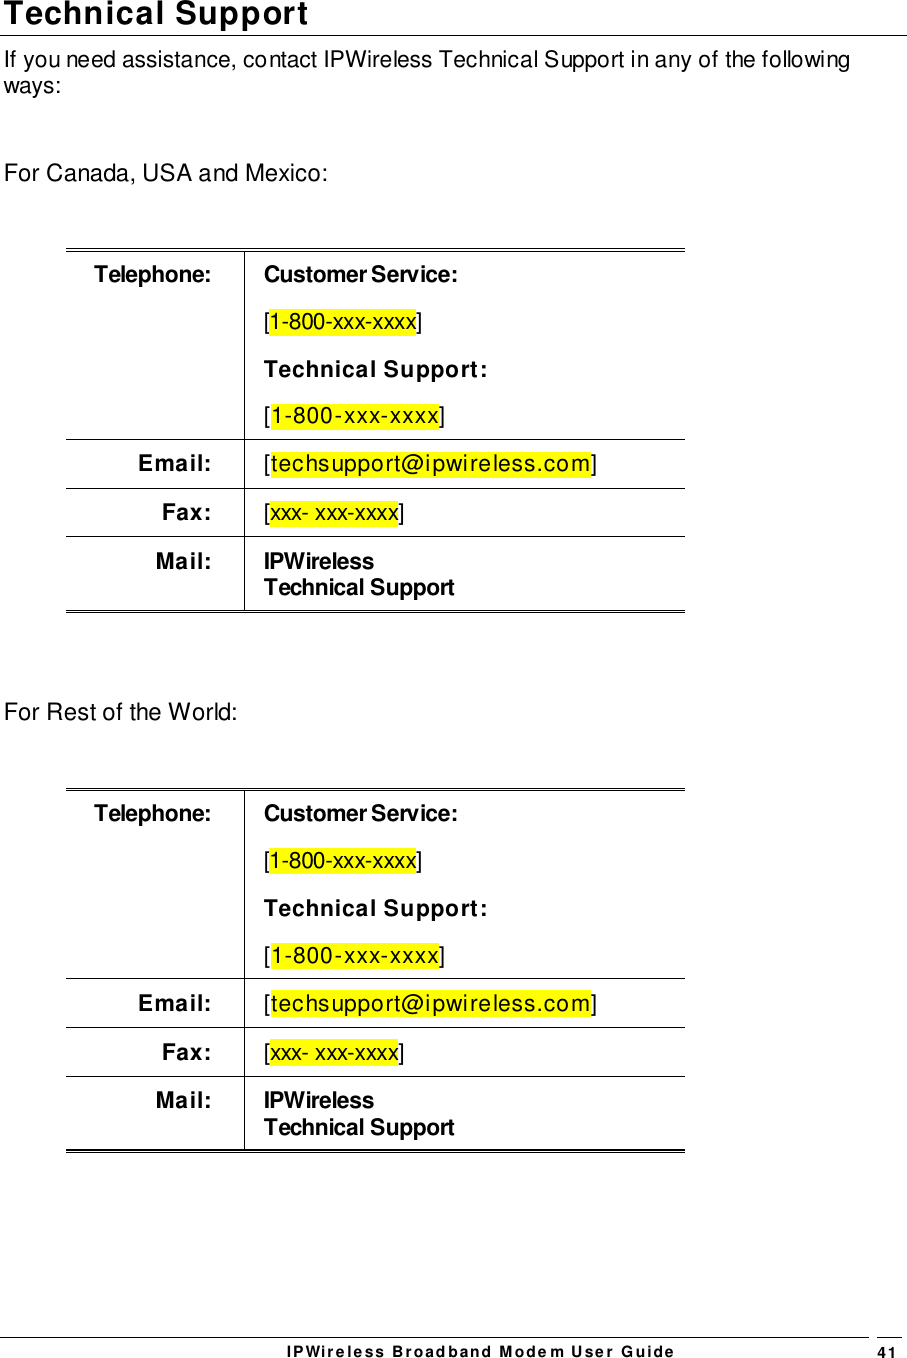 IPWireless Broadband Modem User Guide 41Technical SupportIf you need assistance, contact IPWireless Technical Support in any of the followingways:For Canada, USA and Mexico:Telephone: Customer Service:[1-800-xxx-xxxx]Technical Support:[1-800-xxx-xxxx]Email: [techsupport@ipwireless.com]Fax: [xxx- xxx-xxxx]Mail: IPWirelessTechnical SupportFor Rest of the World:Telephone: Customer Service:[1-800-xxx-xxxx]Technical Support:[1-800-xxx-xxxx]Email: [techsupport@ipwireless.com]Fax: [xxx- xxx-xxxx]Mail: IPWirelessTechnical Support